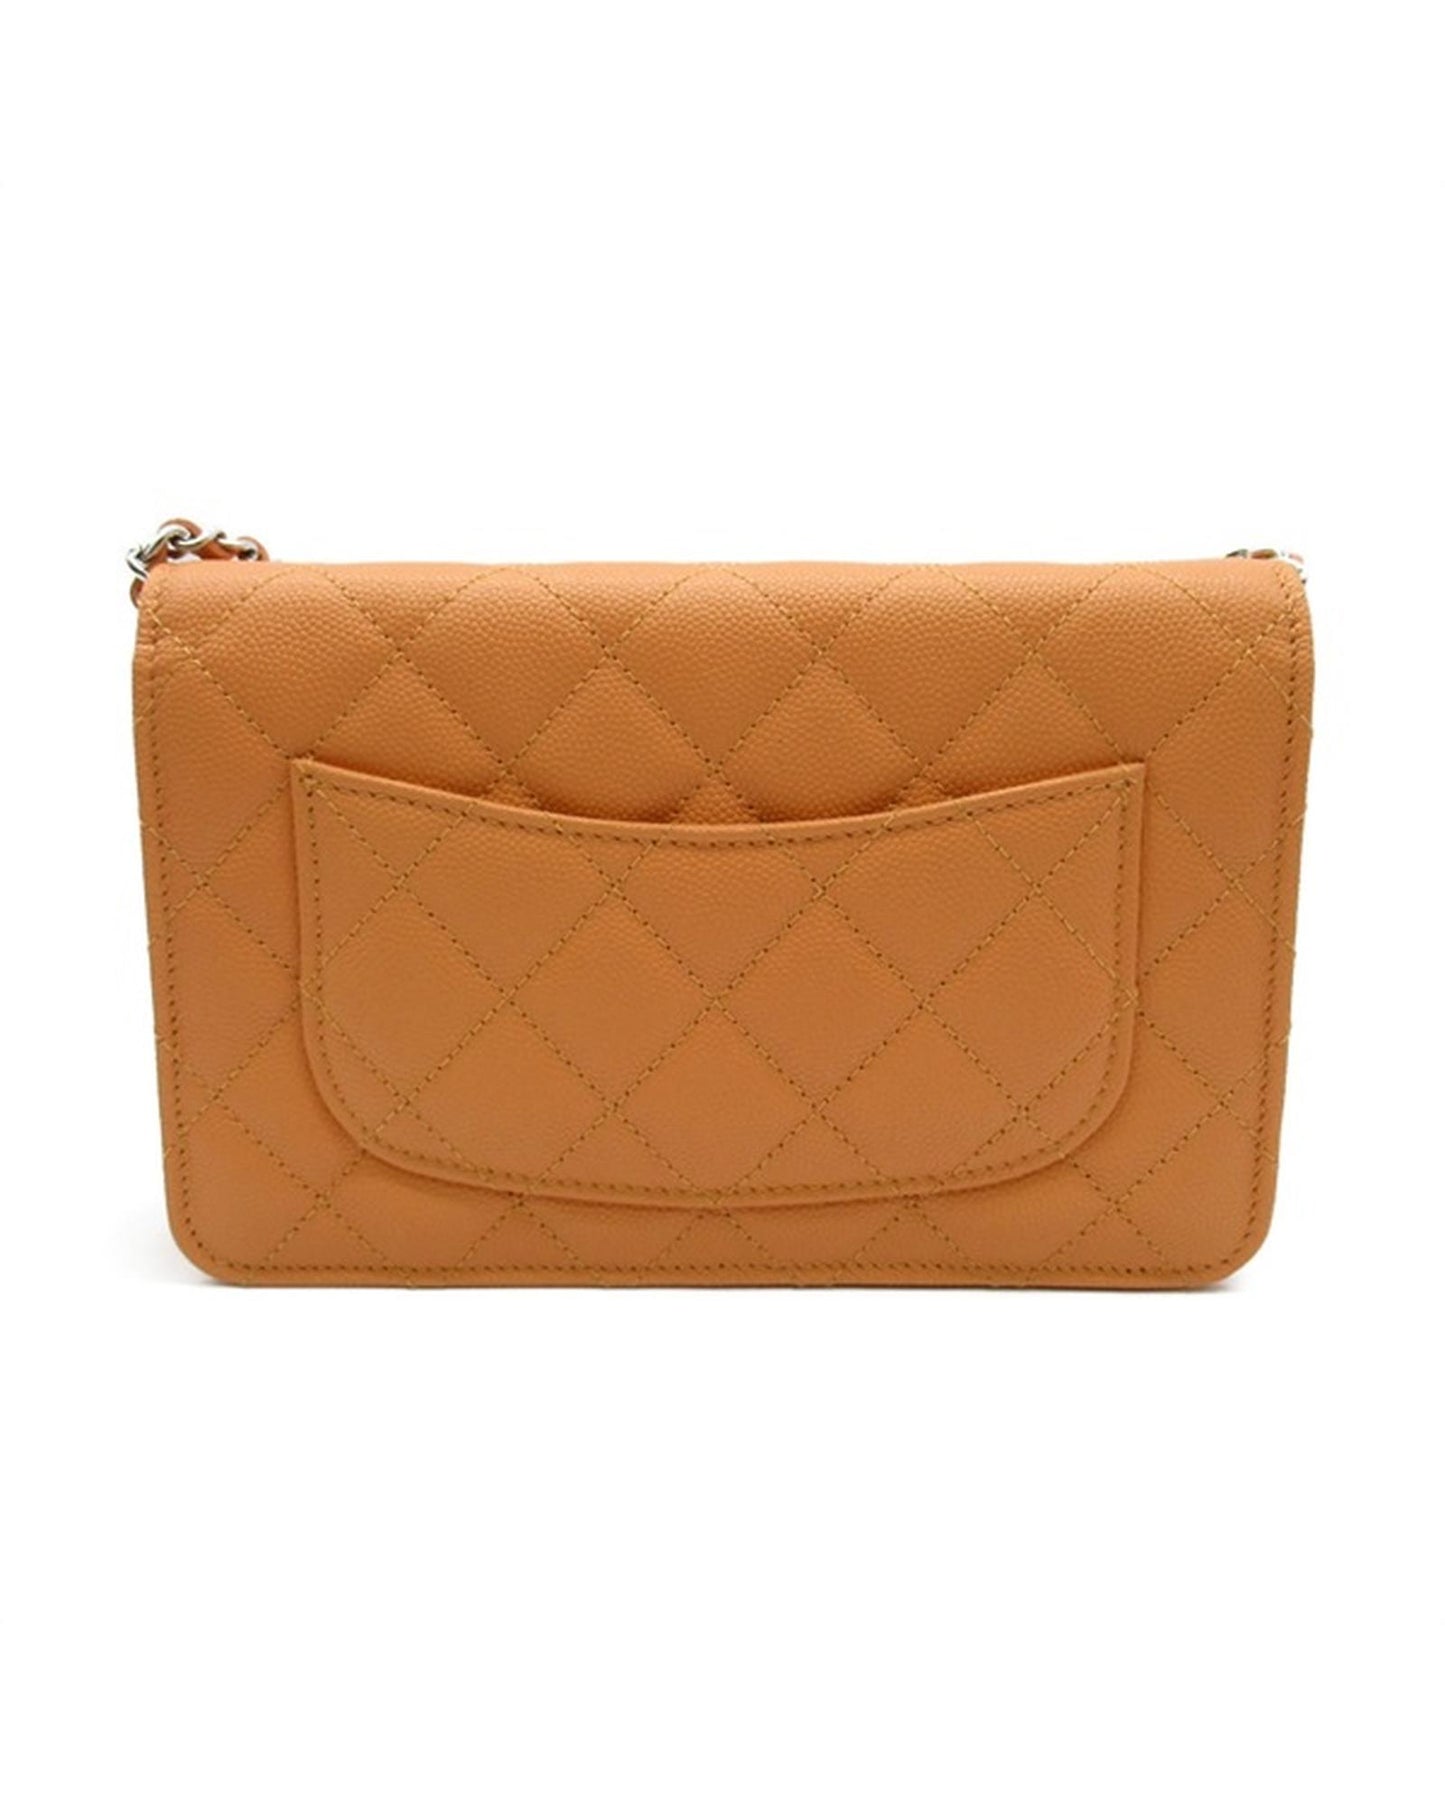 Chanel Women's Chanel Quilted Wallet on Chain Bag in Orange